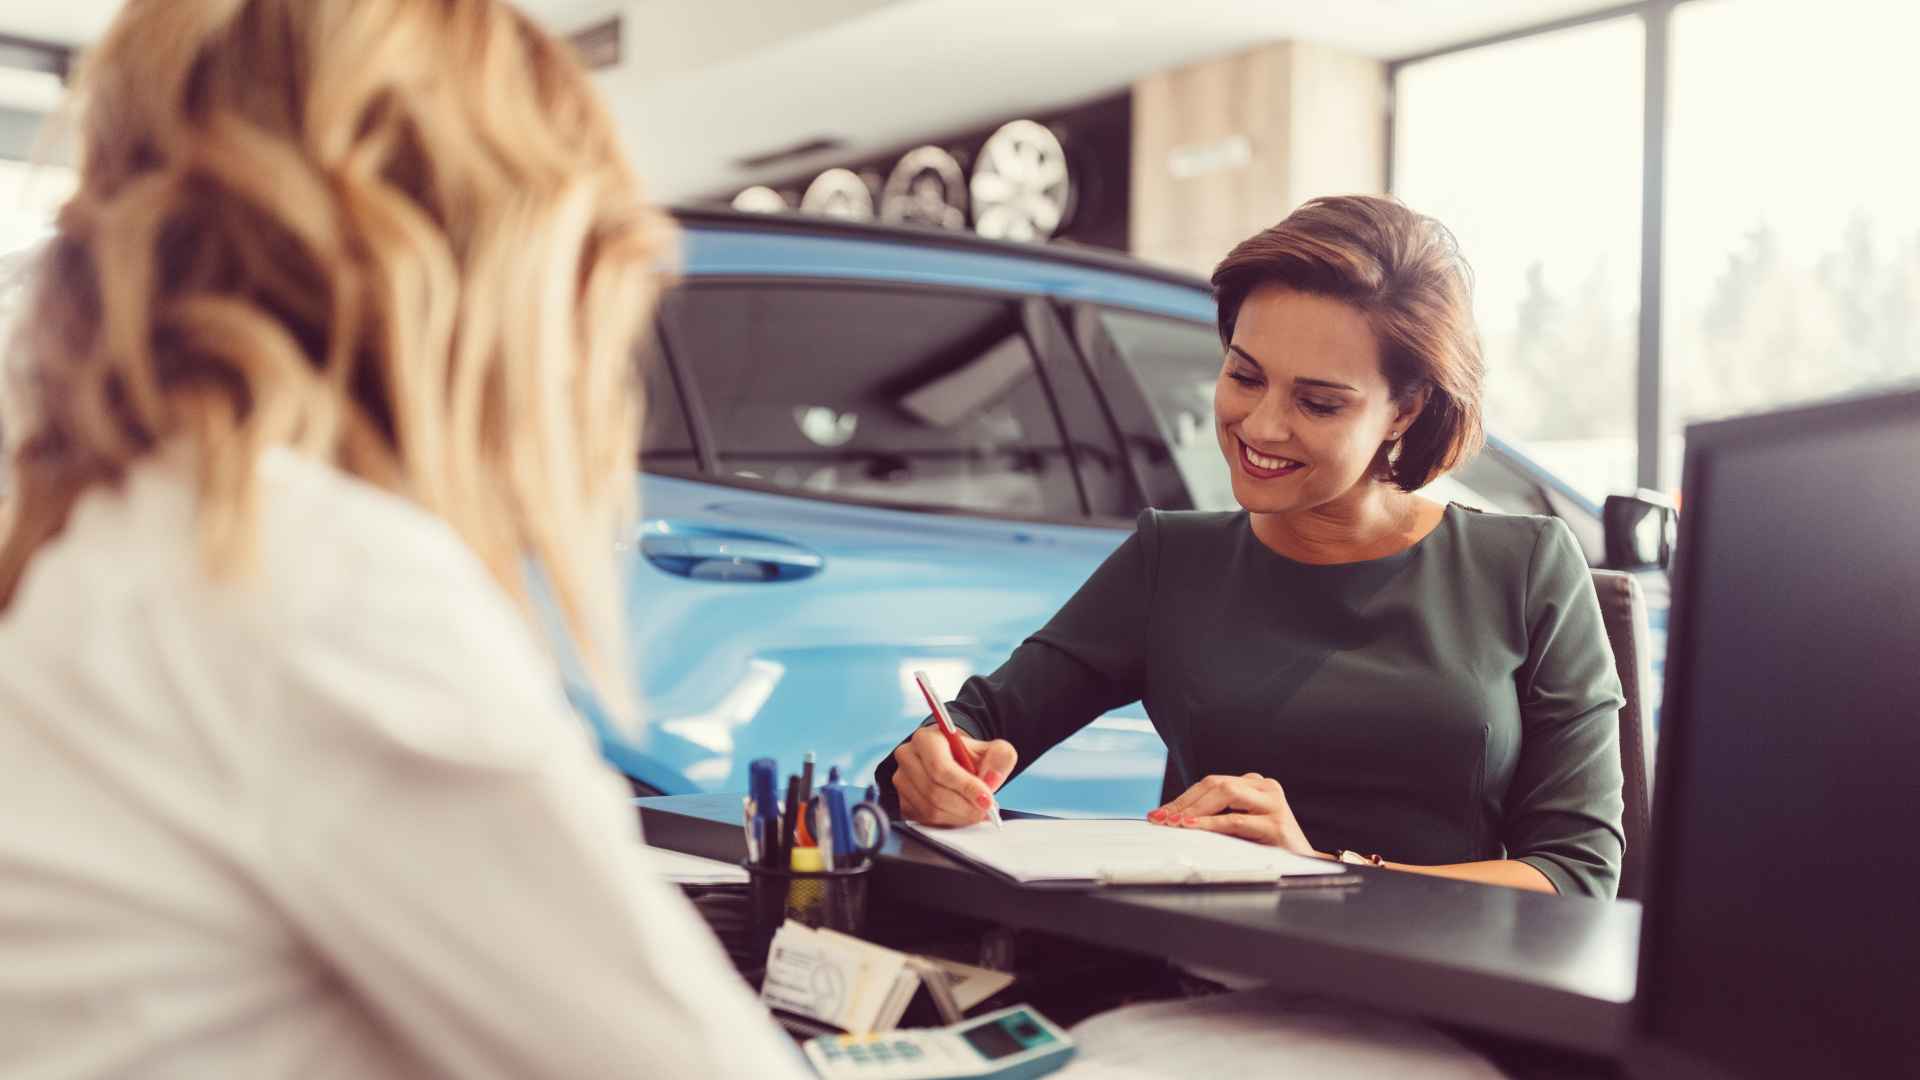 25 Sneaky Car Dealership Tricks To Watch Out For